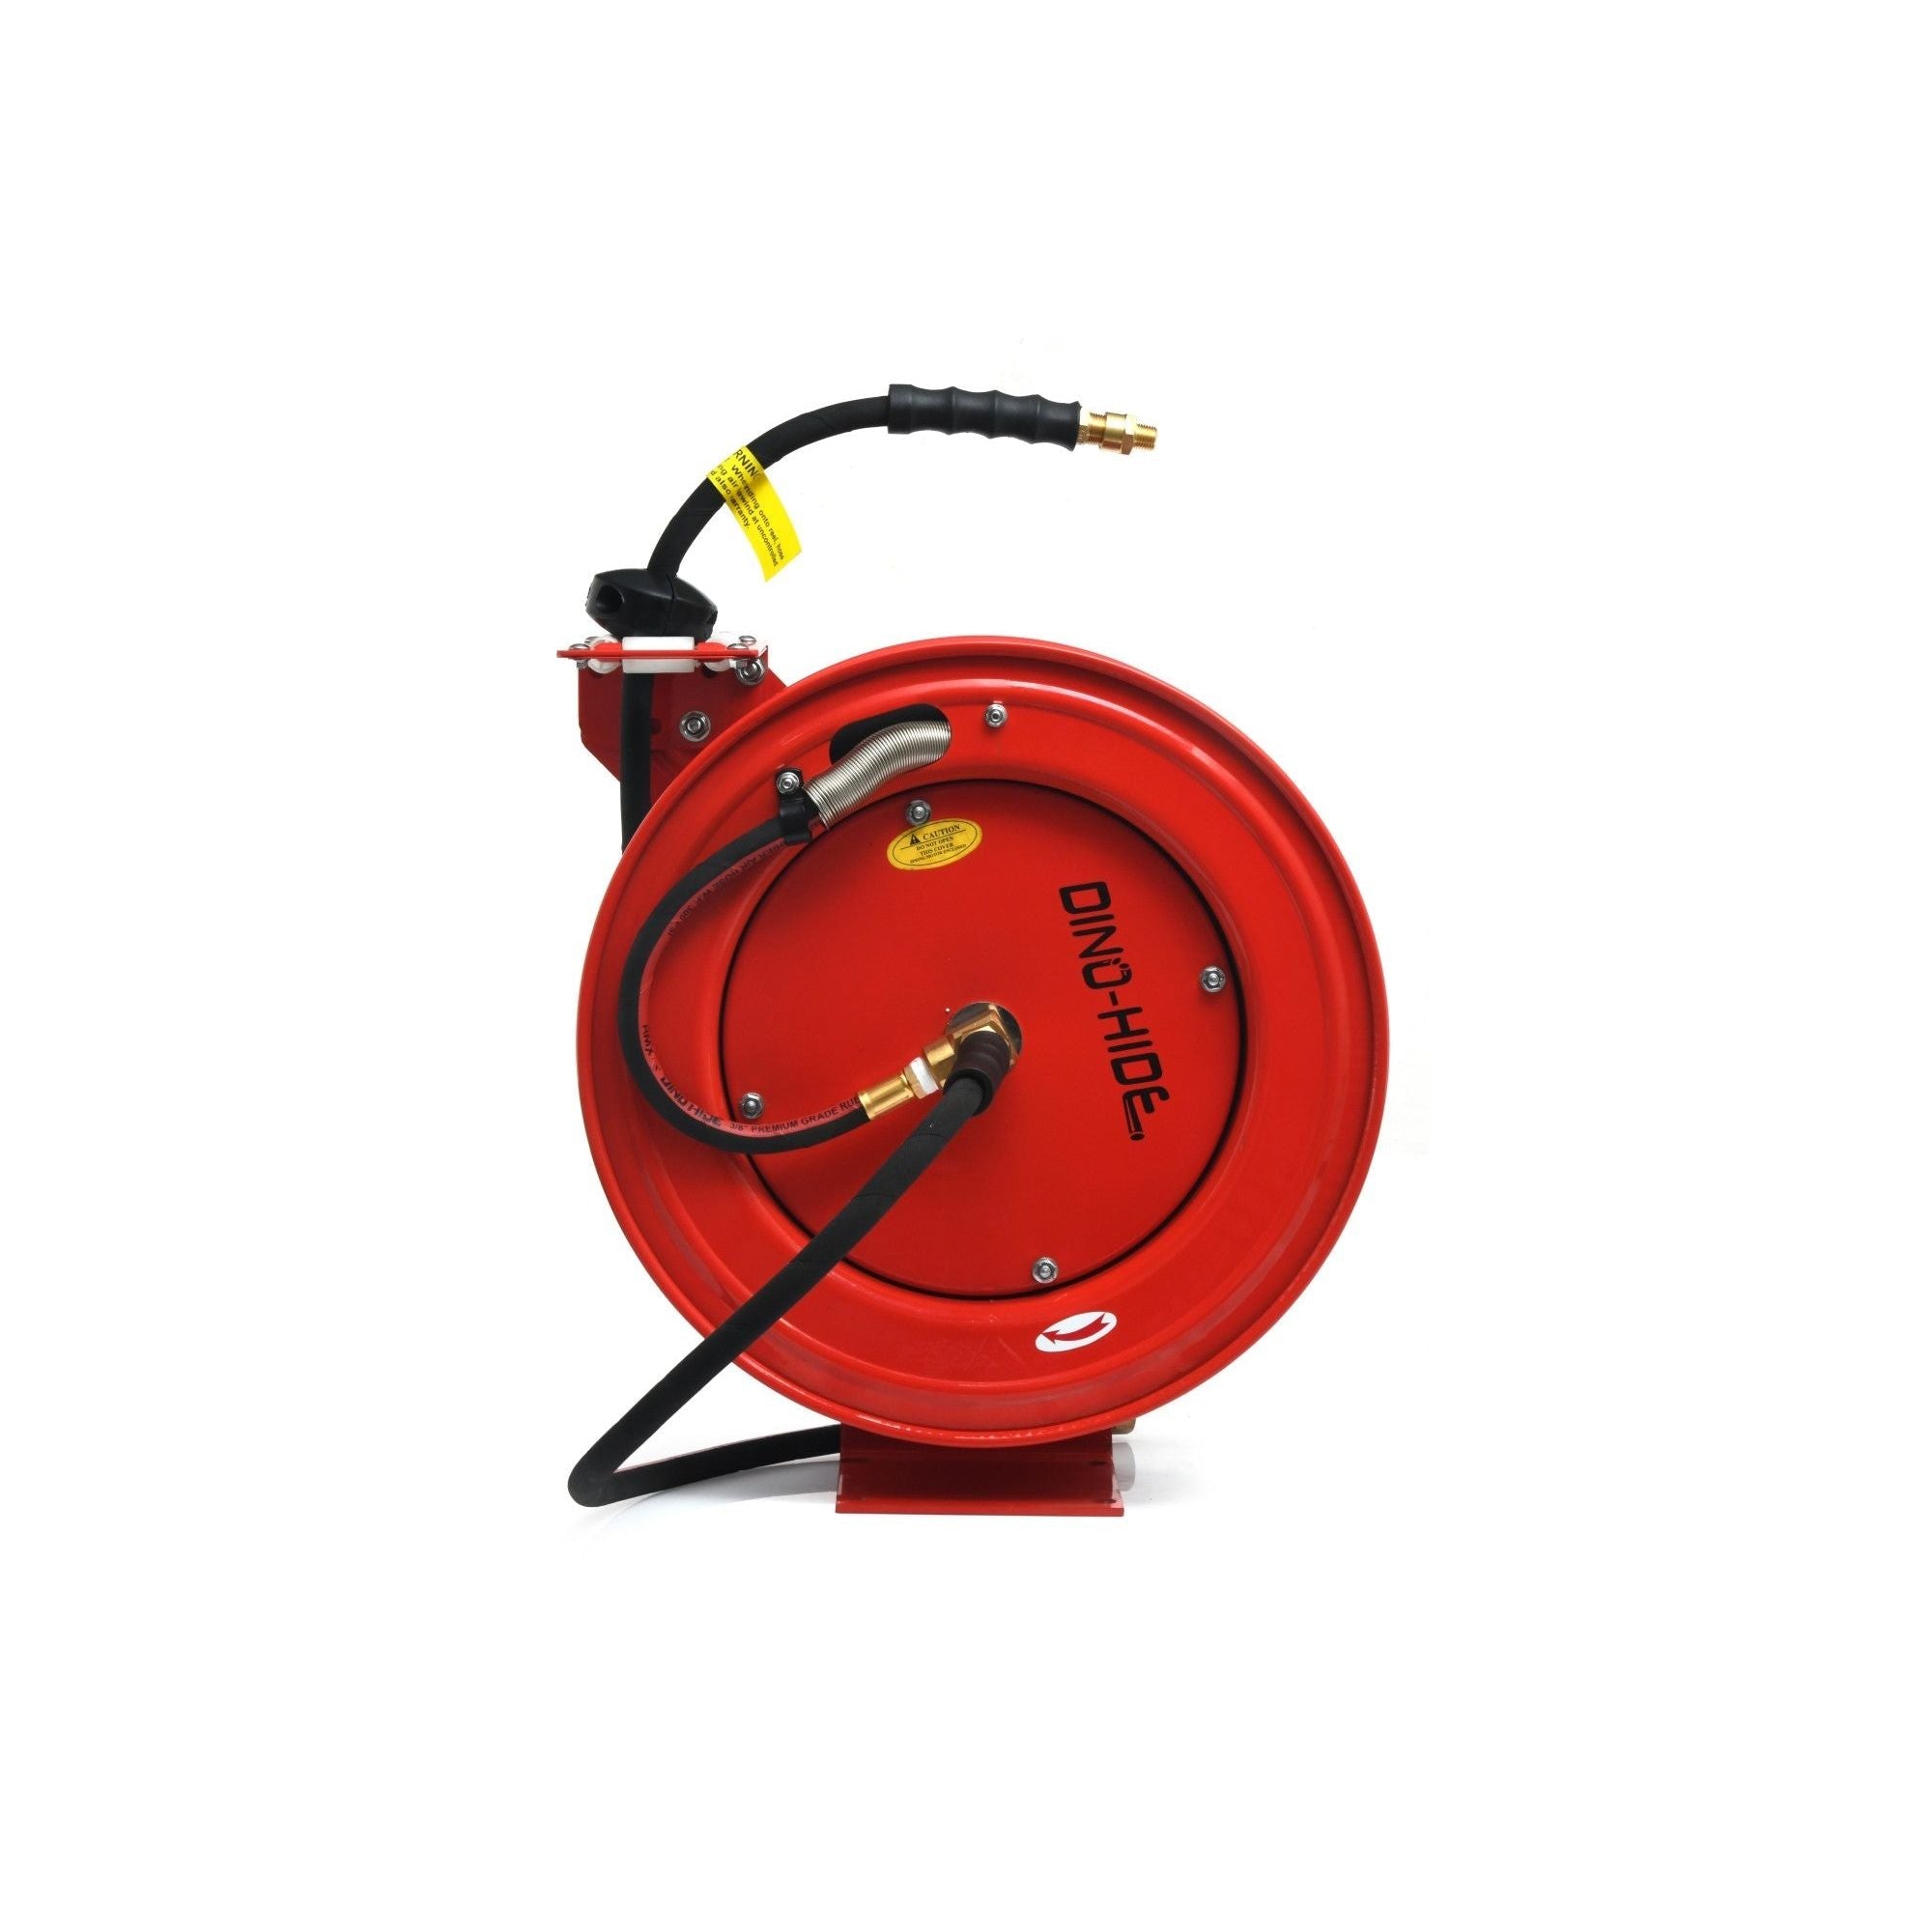 Dino-Hide Air Hose Reel 1/2" x 50' Retractable Heavy Duty Steel Construction with Wrapped Rubber Hose 300 PSI